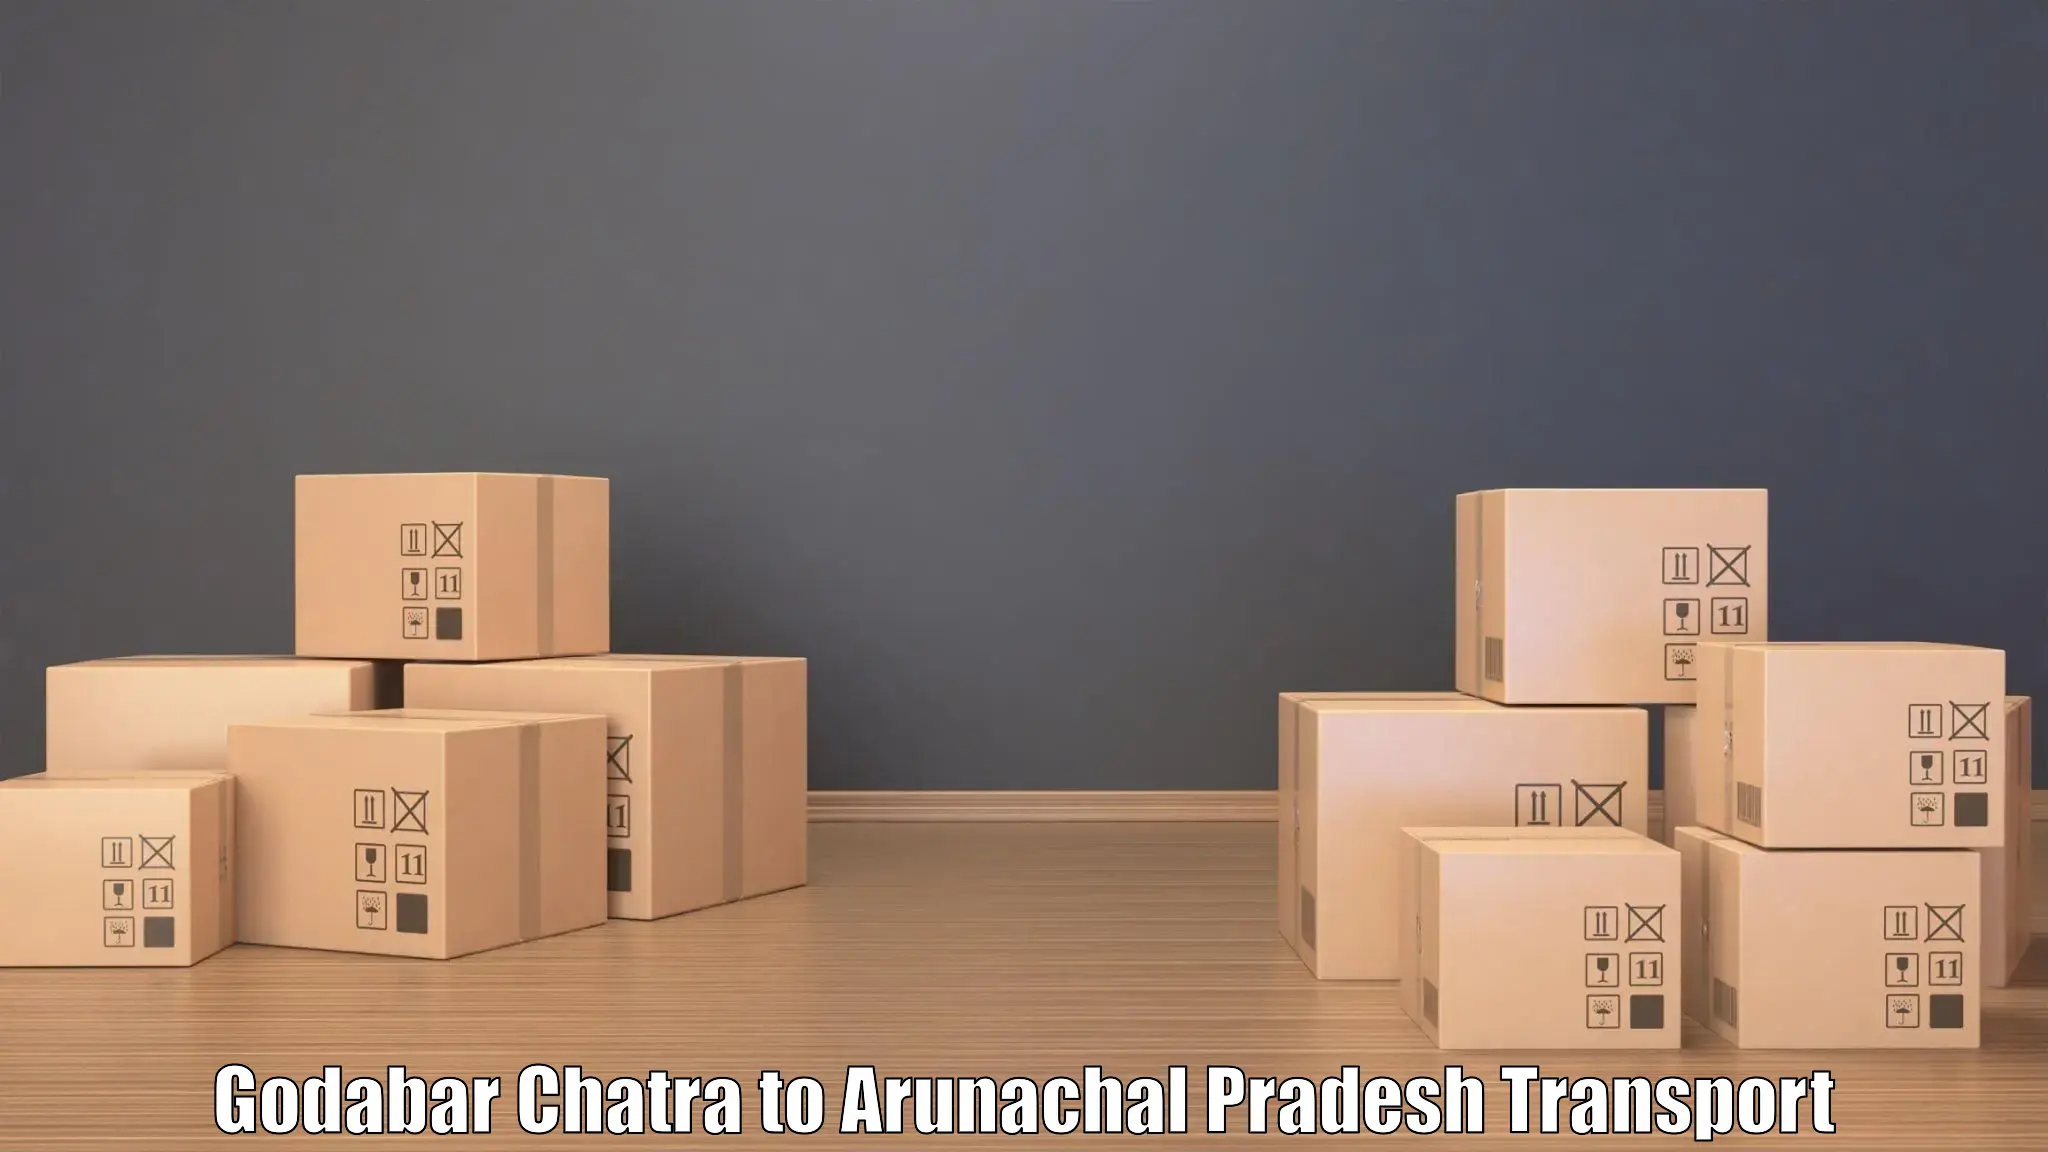 Truck transport companies in India Godabar Chatra to Aalo